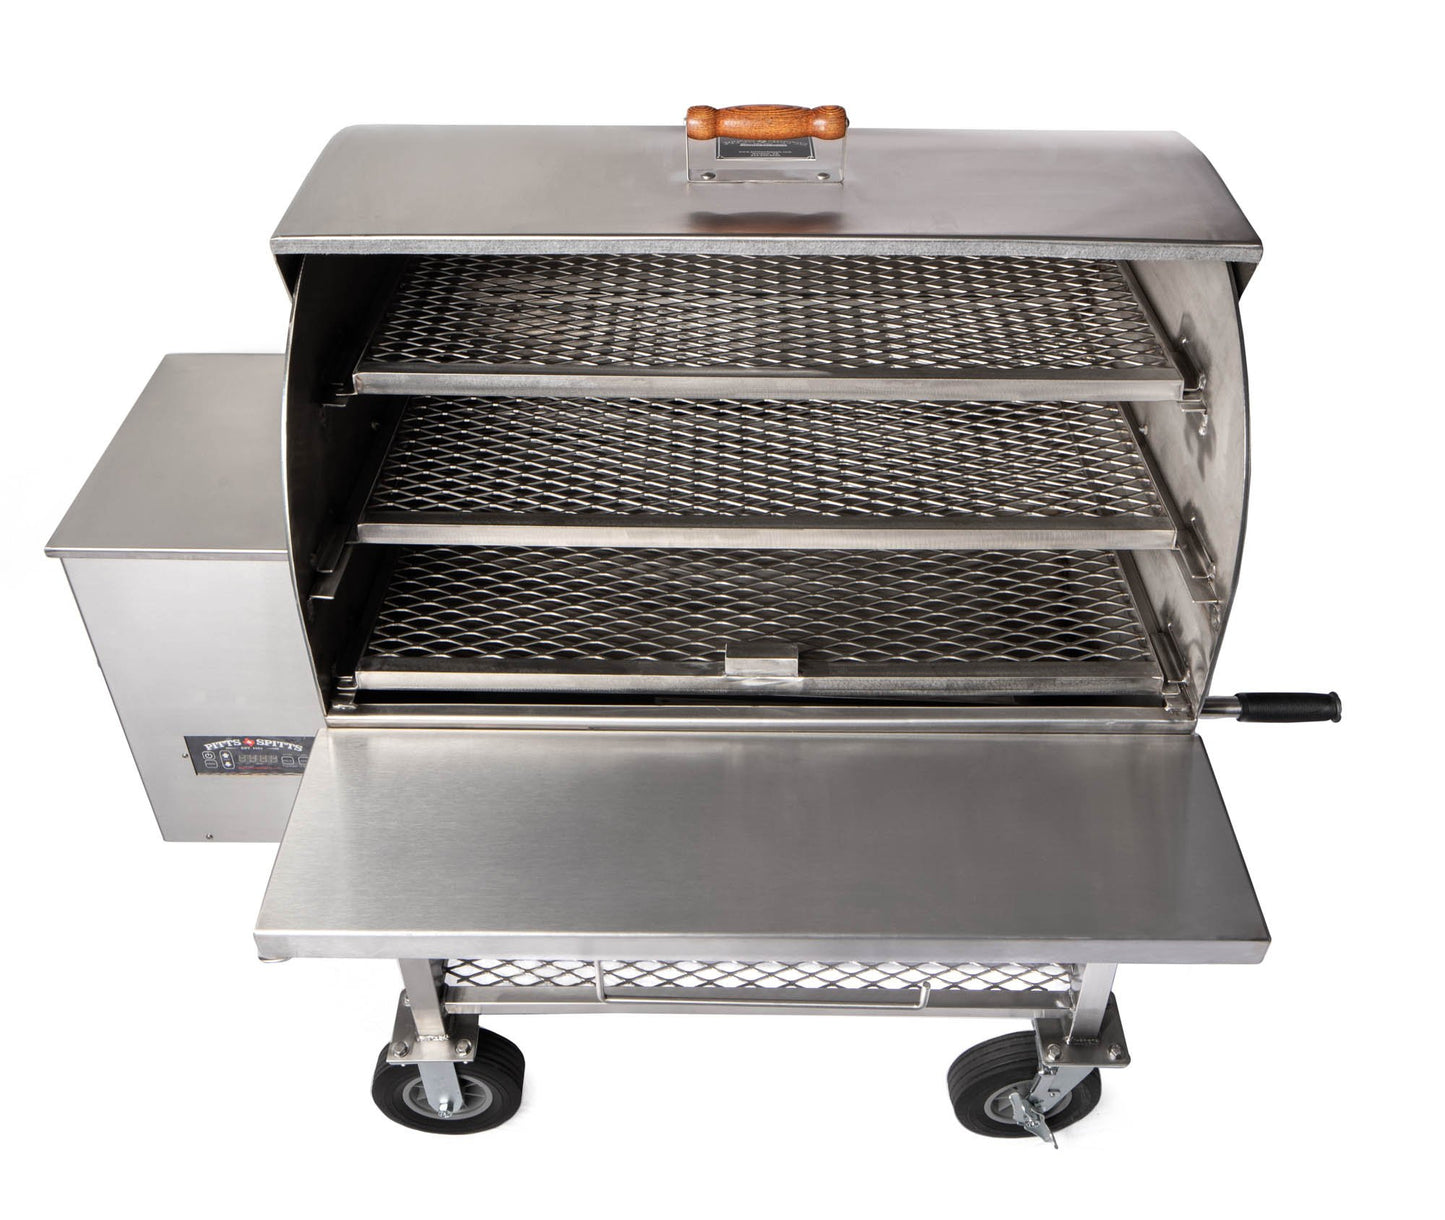 Pitts & Spitts Maverick 2000 Stainless Steel Pellet Grill Pitts & Spitts Indigo Pool Patio BBQ